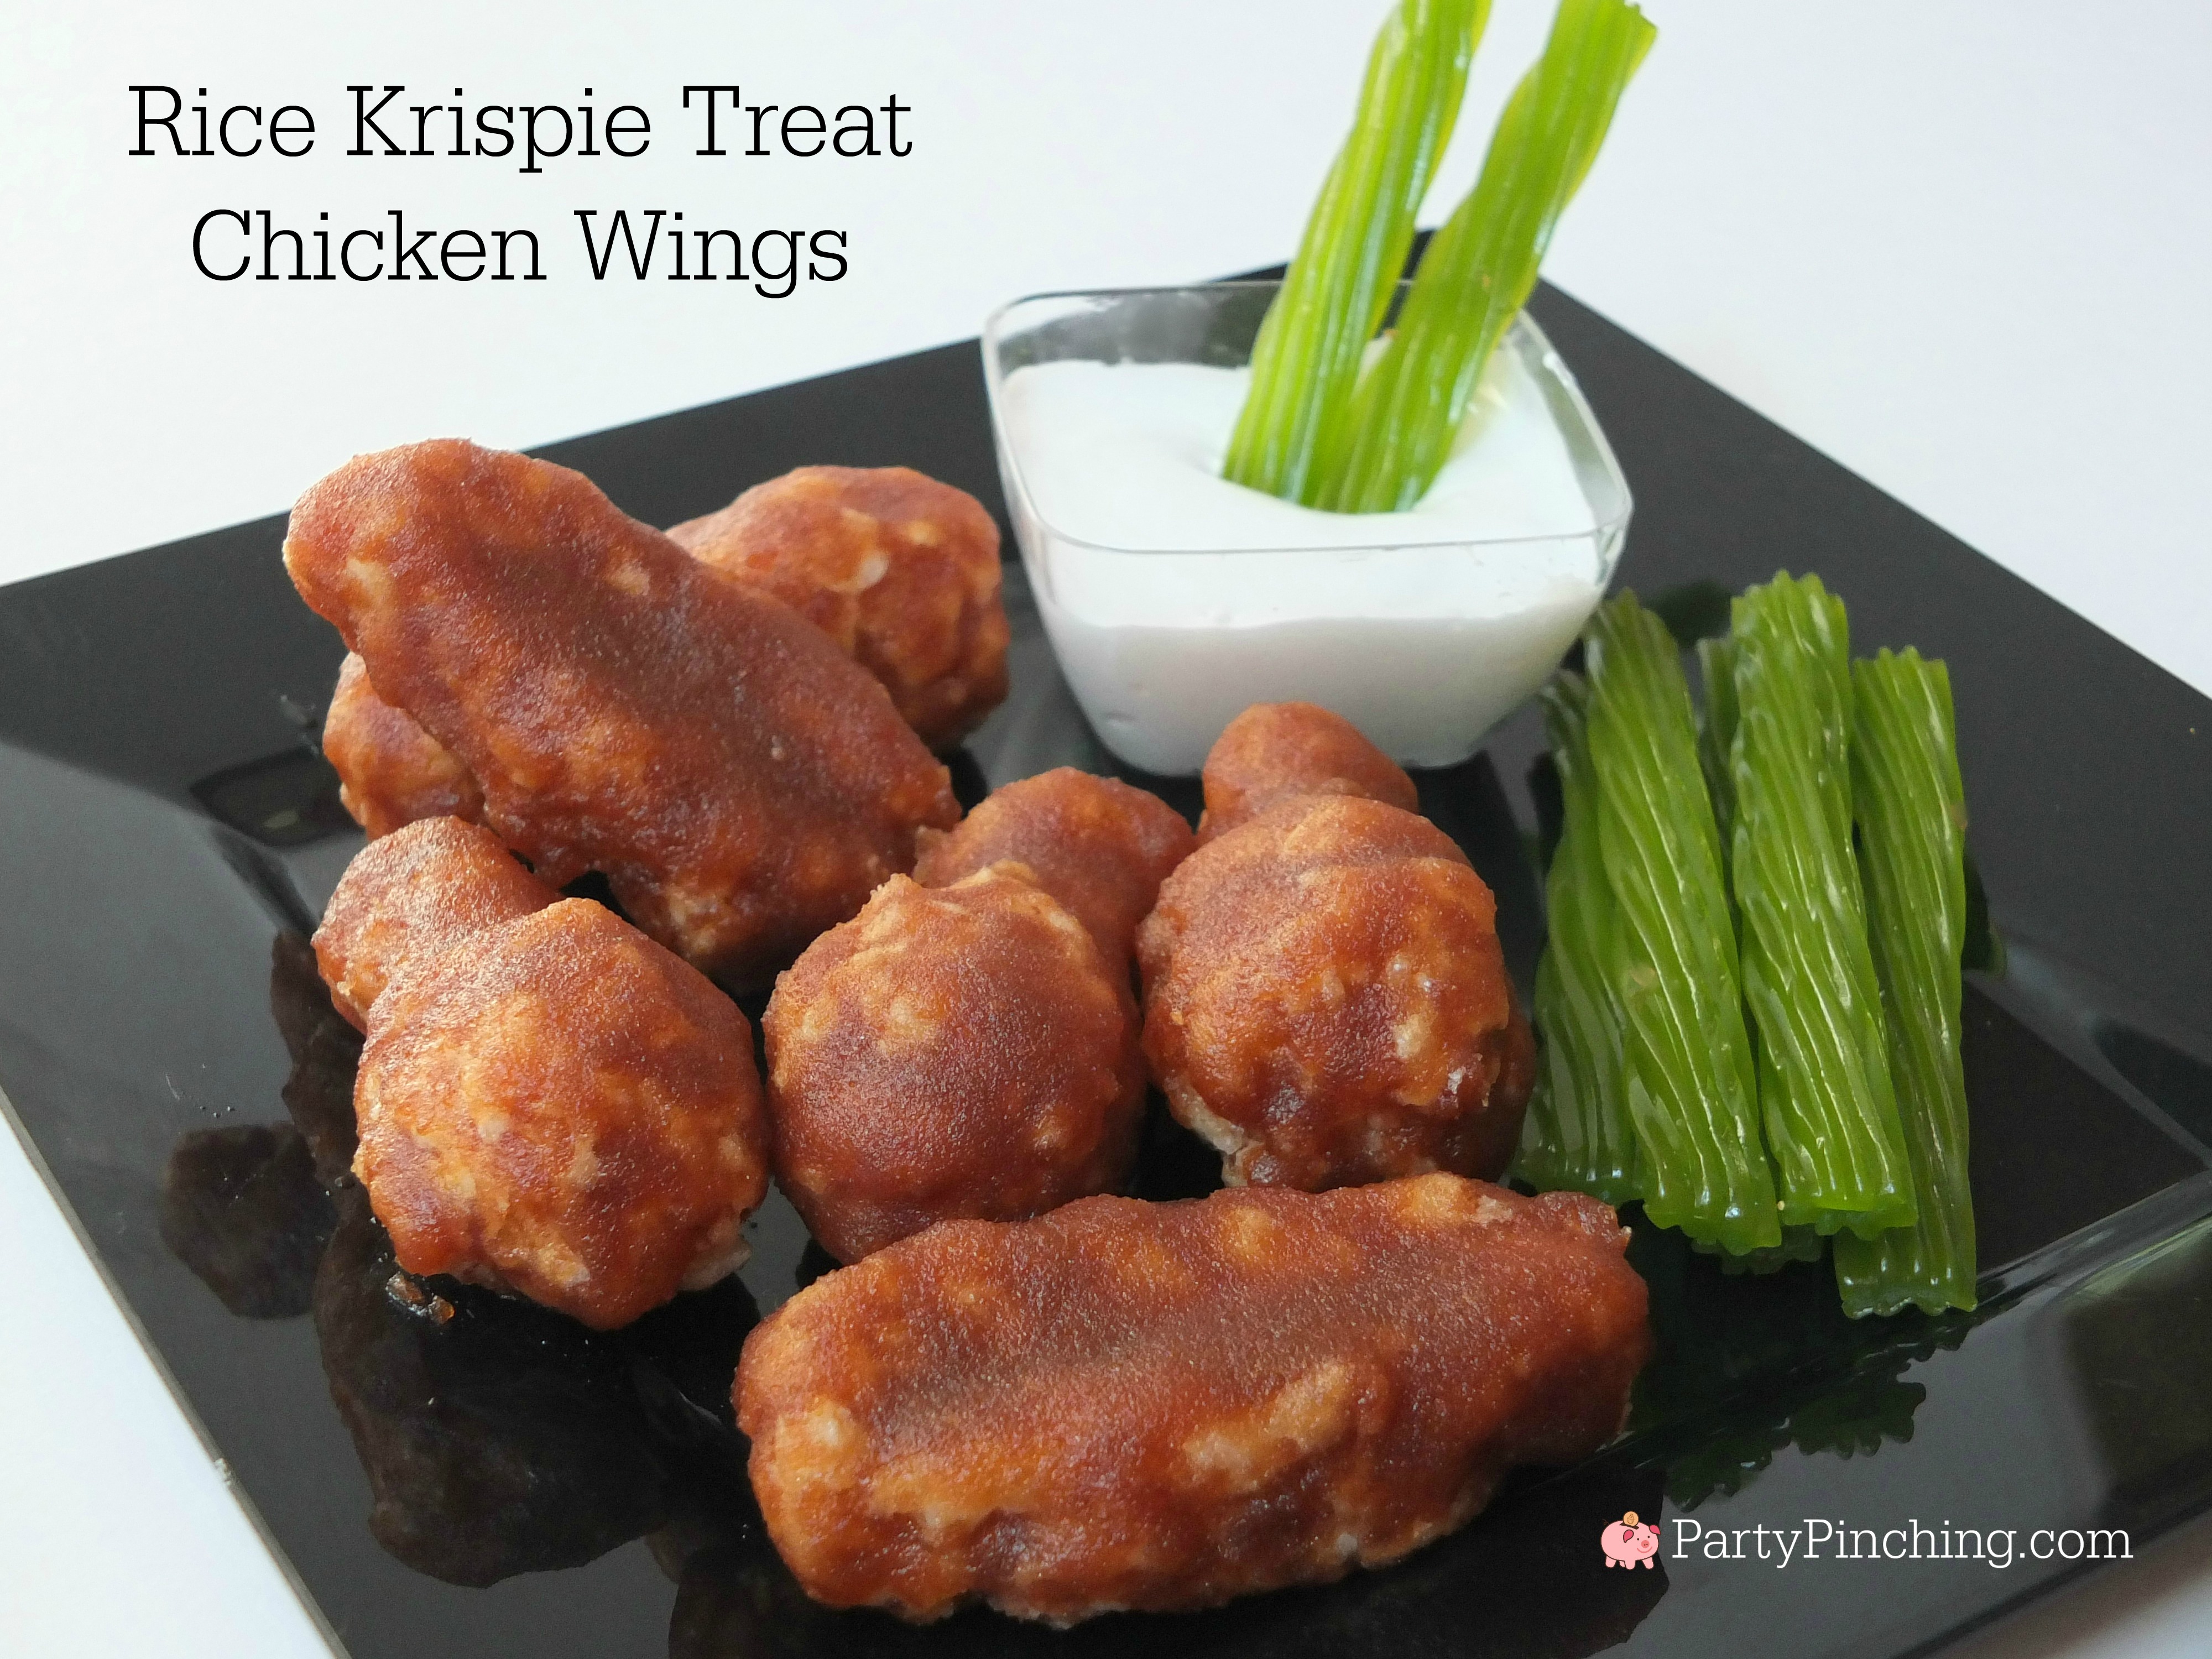 Best April Fools' Day Food Pranks Buffalo Wings Rice Krispie Treat Chicken Wings with celery licorice